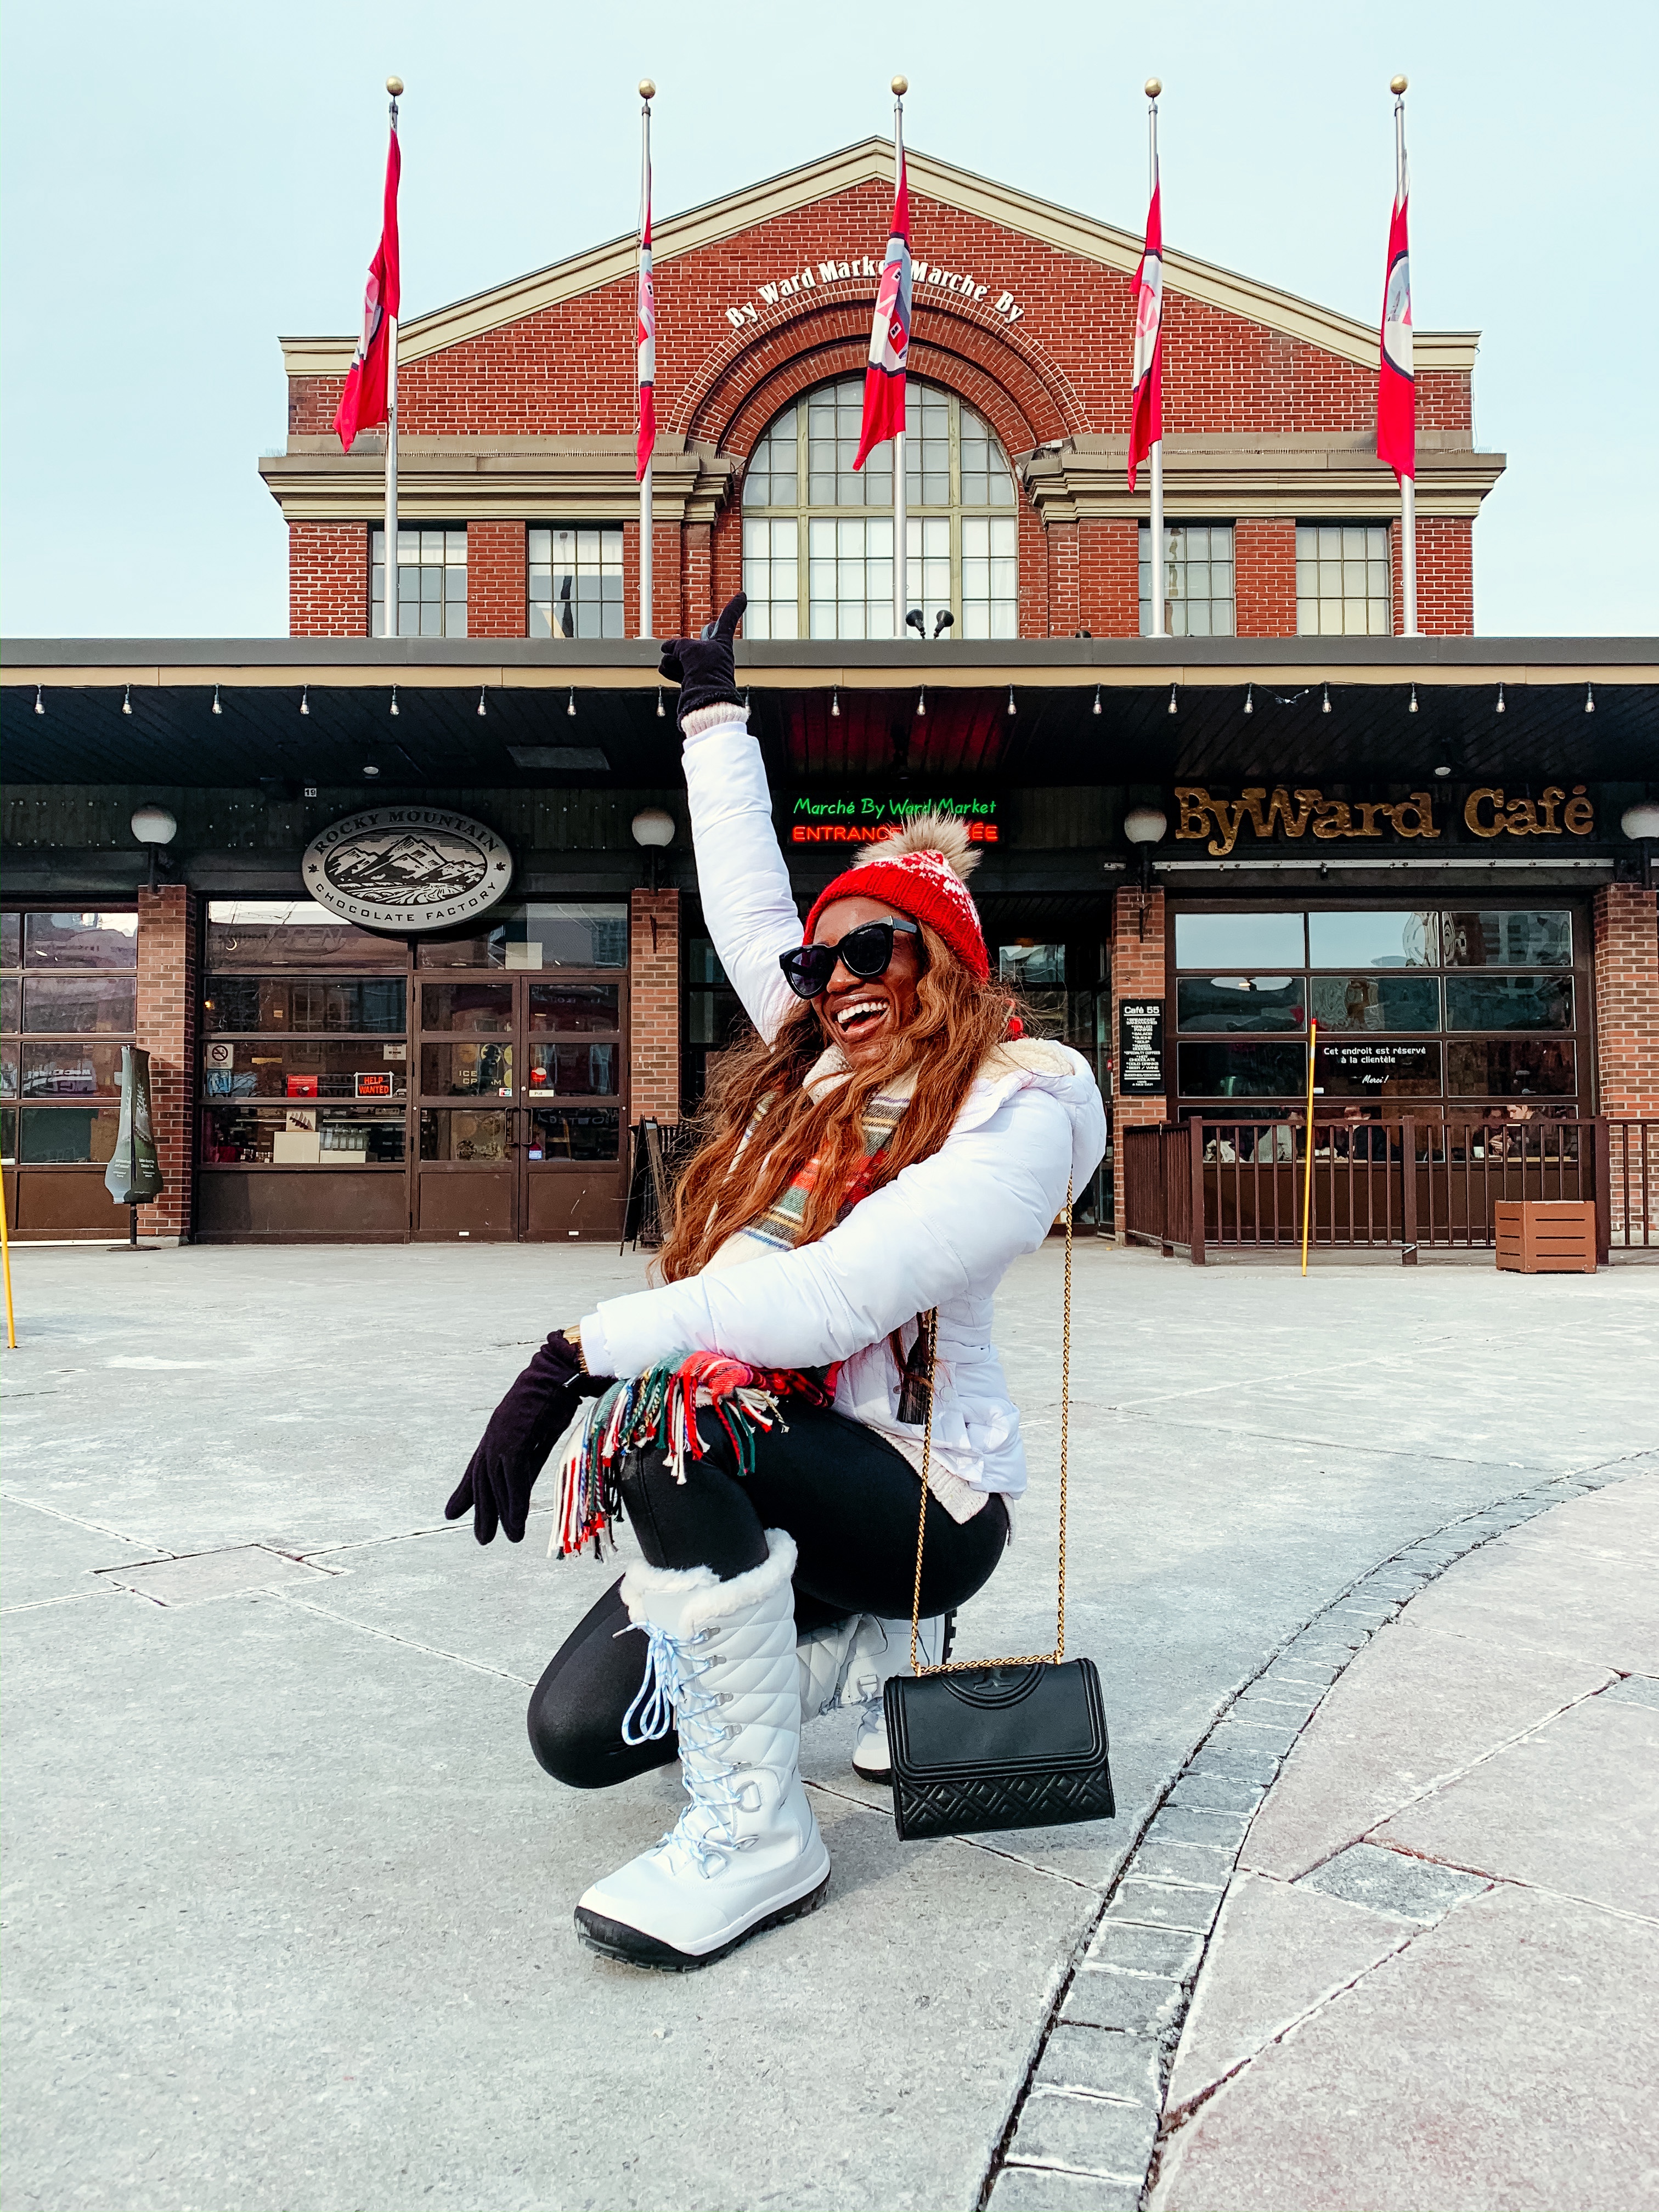 Byward market has international food options, a cafe for a quick bite, and gift shop. Located right in downtown Ottawa, it's a must see during your trip! | 72 Hours in Ottaw Canada Guide- GoodTomiCha.com